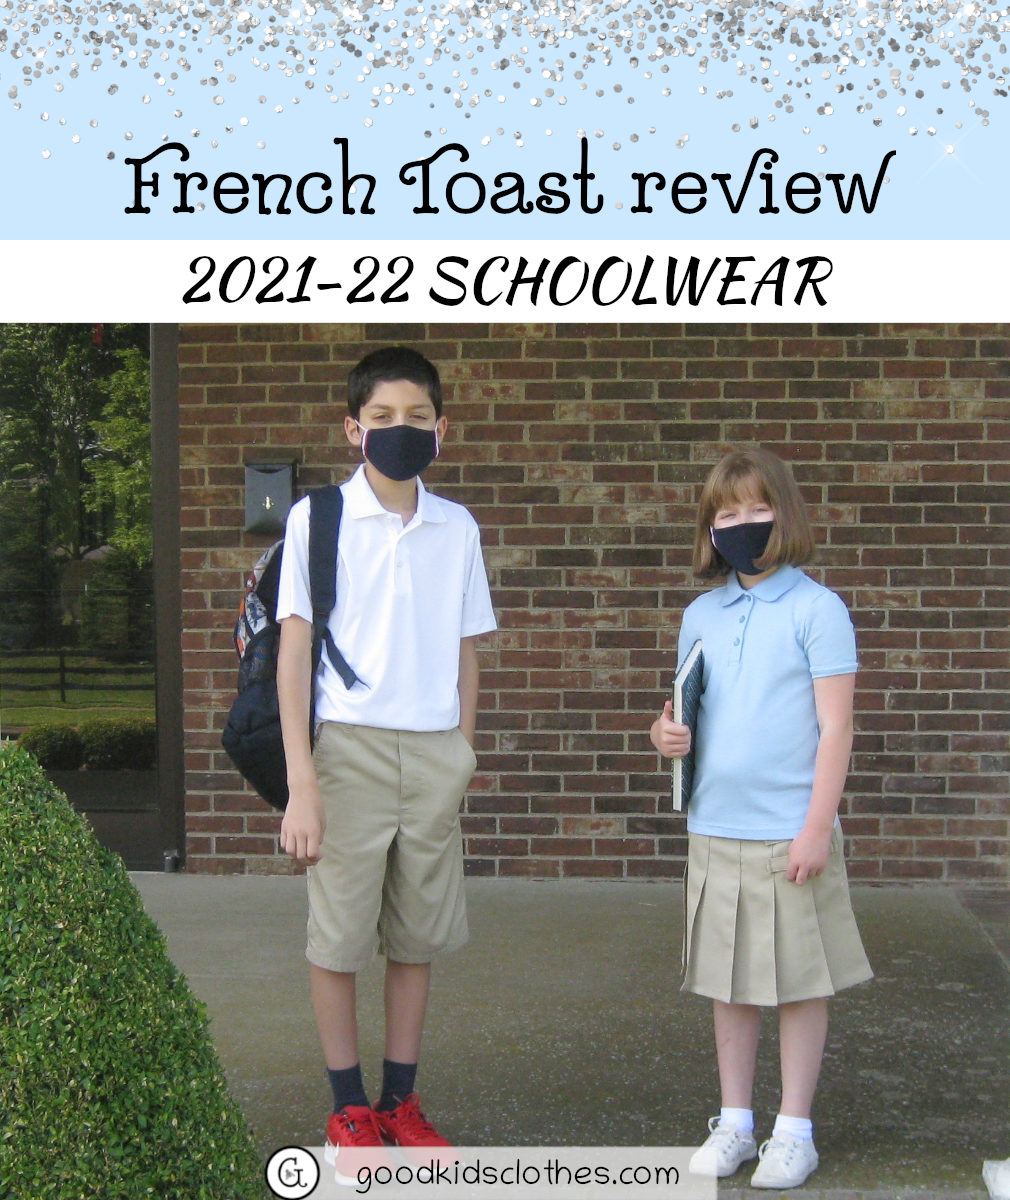 Boy and girl standing in French Toast schoolwear - French Toast review of 2021-22 schoolwear